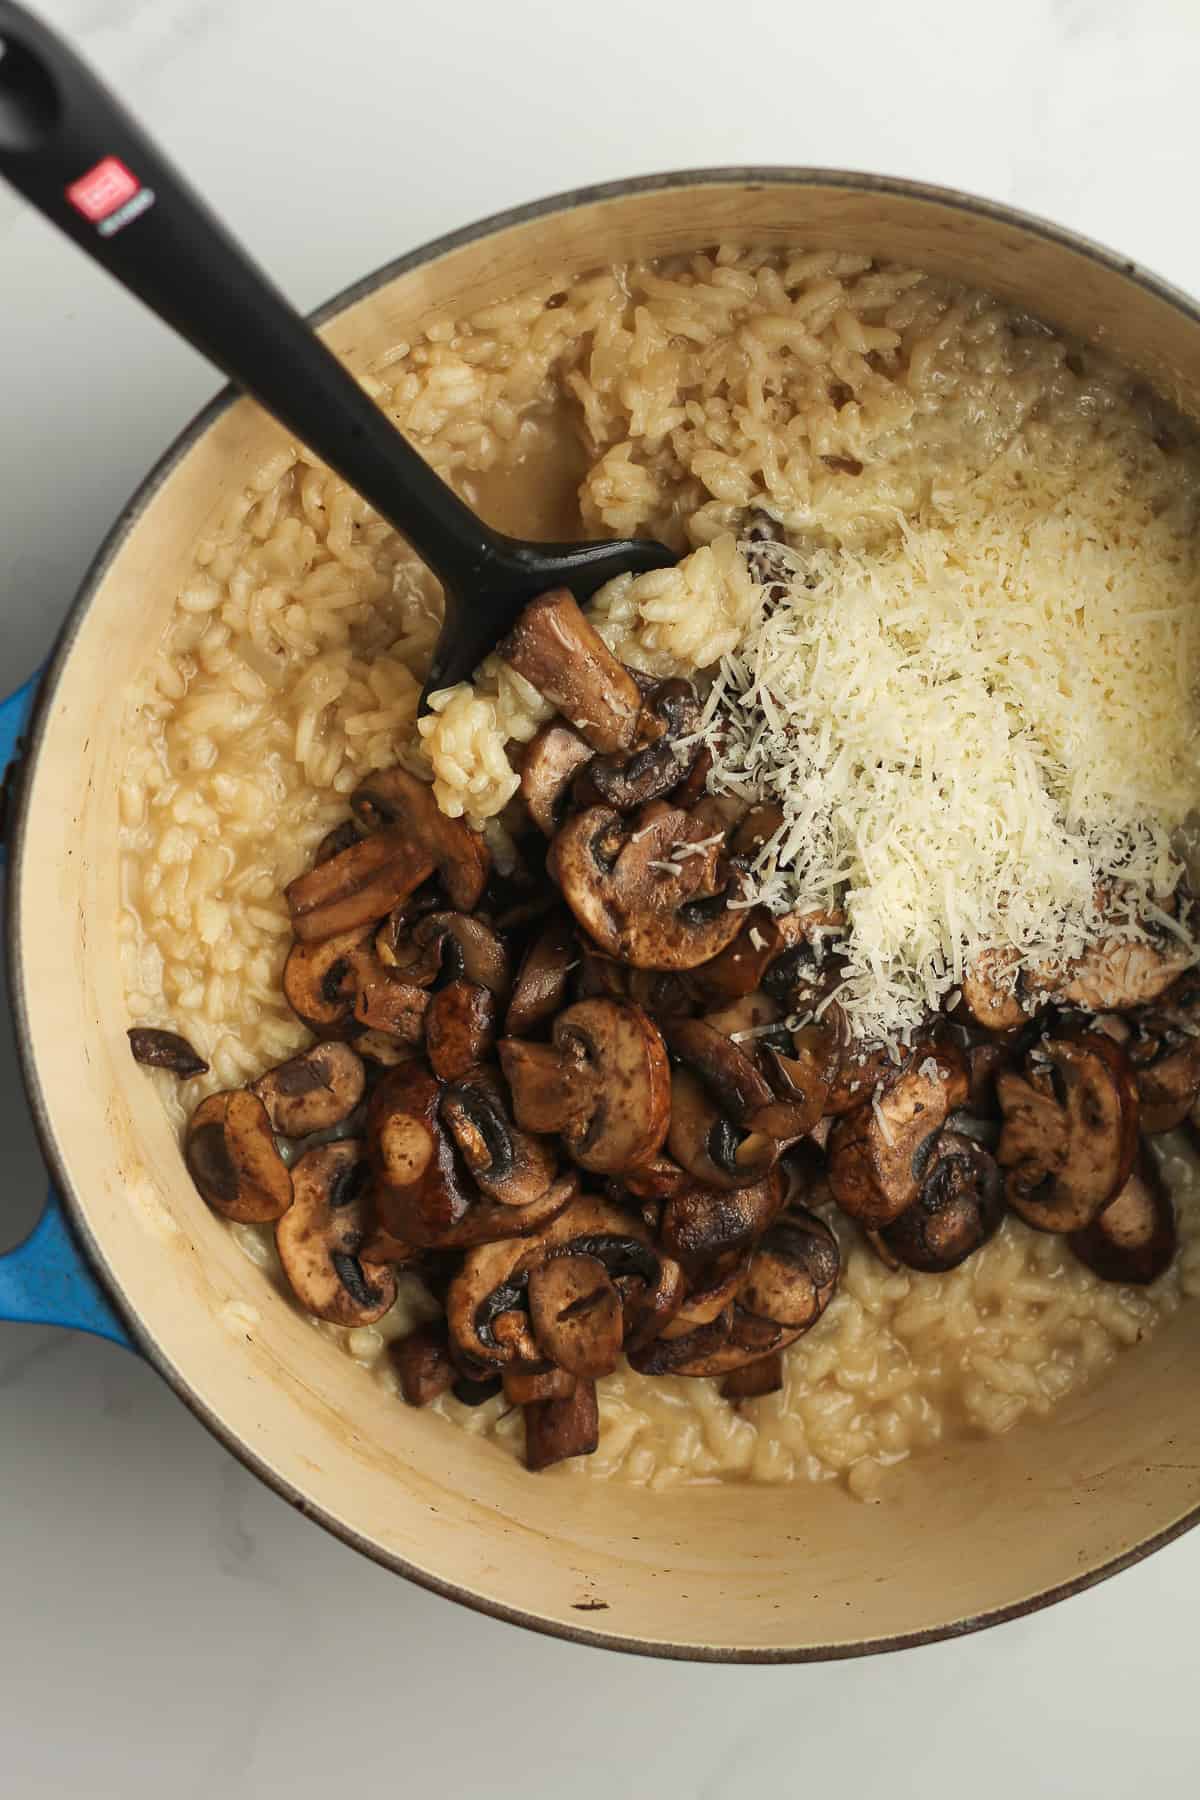 A stock pot of mushroom risotto, with mushrooms and parmesan cheese on top.